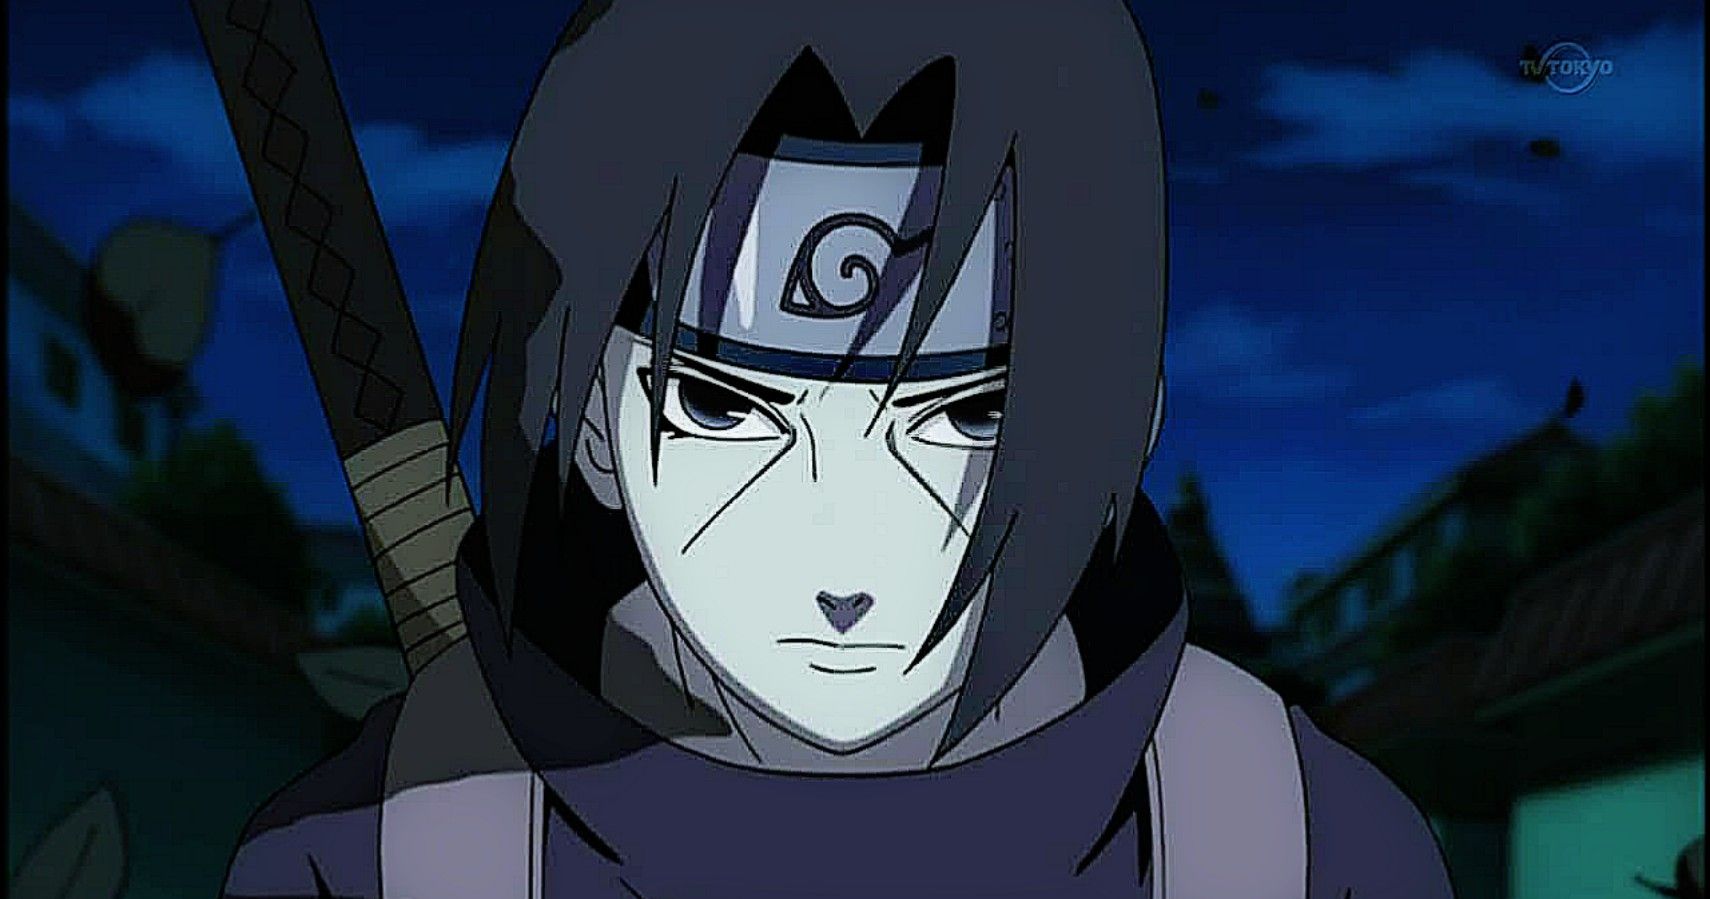 Which characters in Naruto can counter Kotoamatsukami? How and why